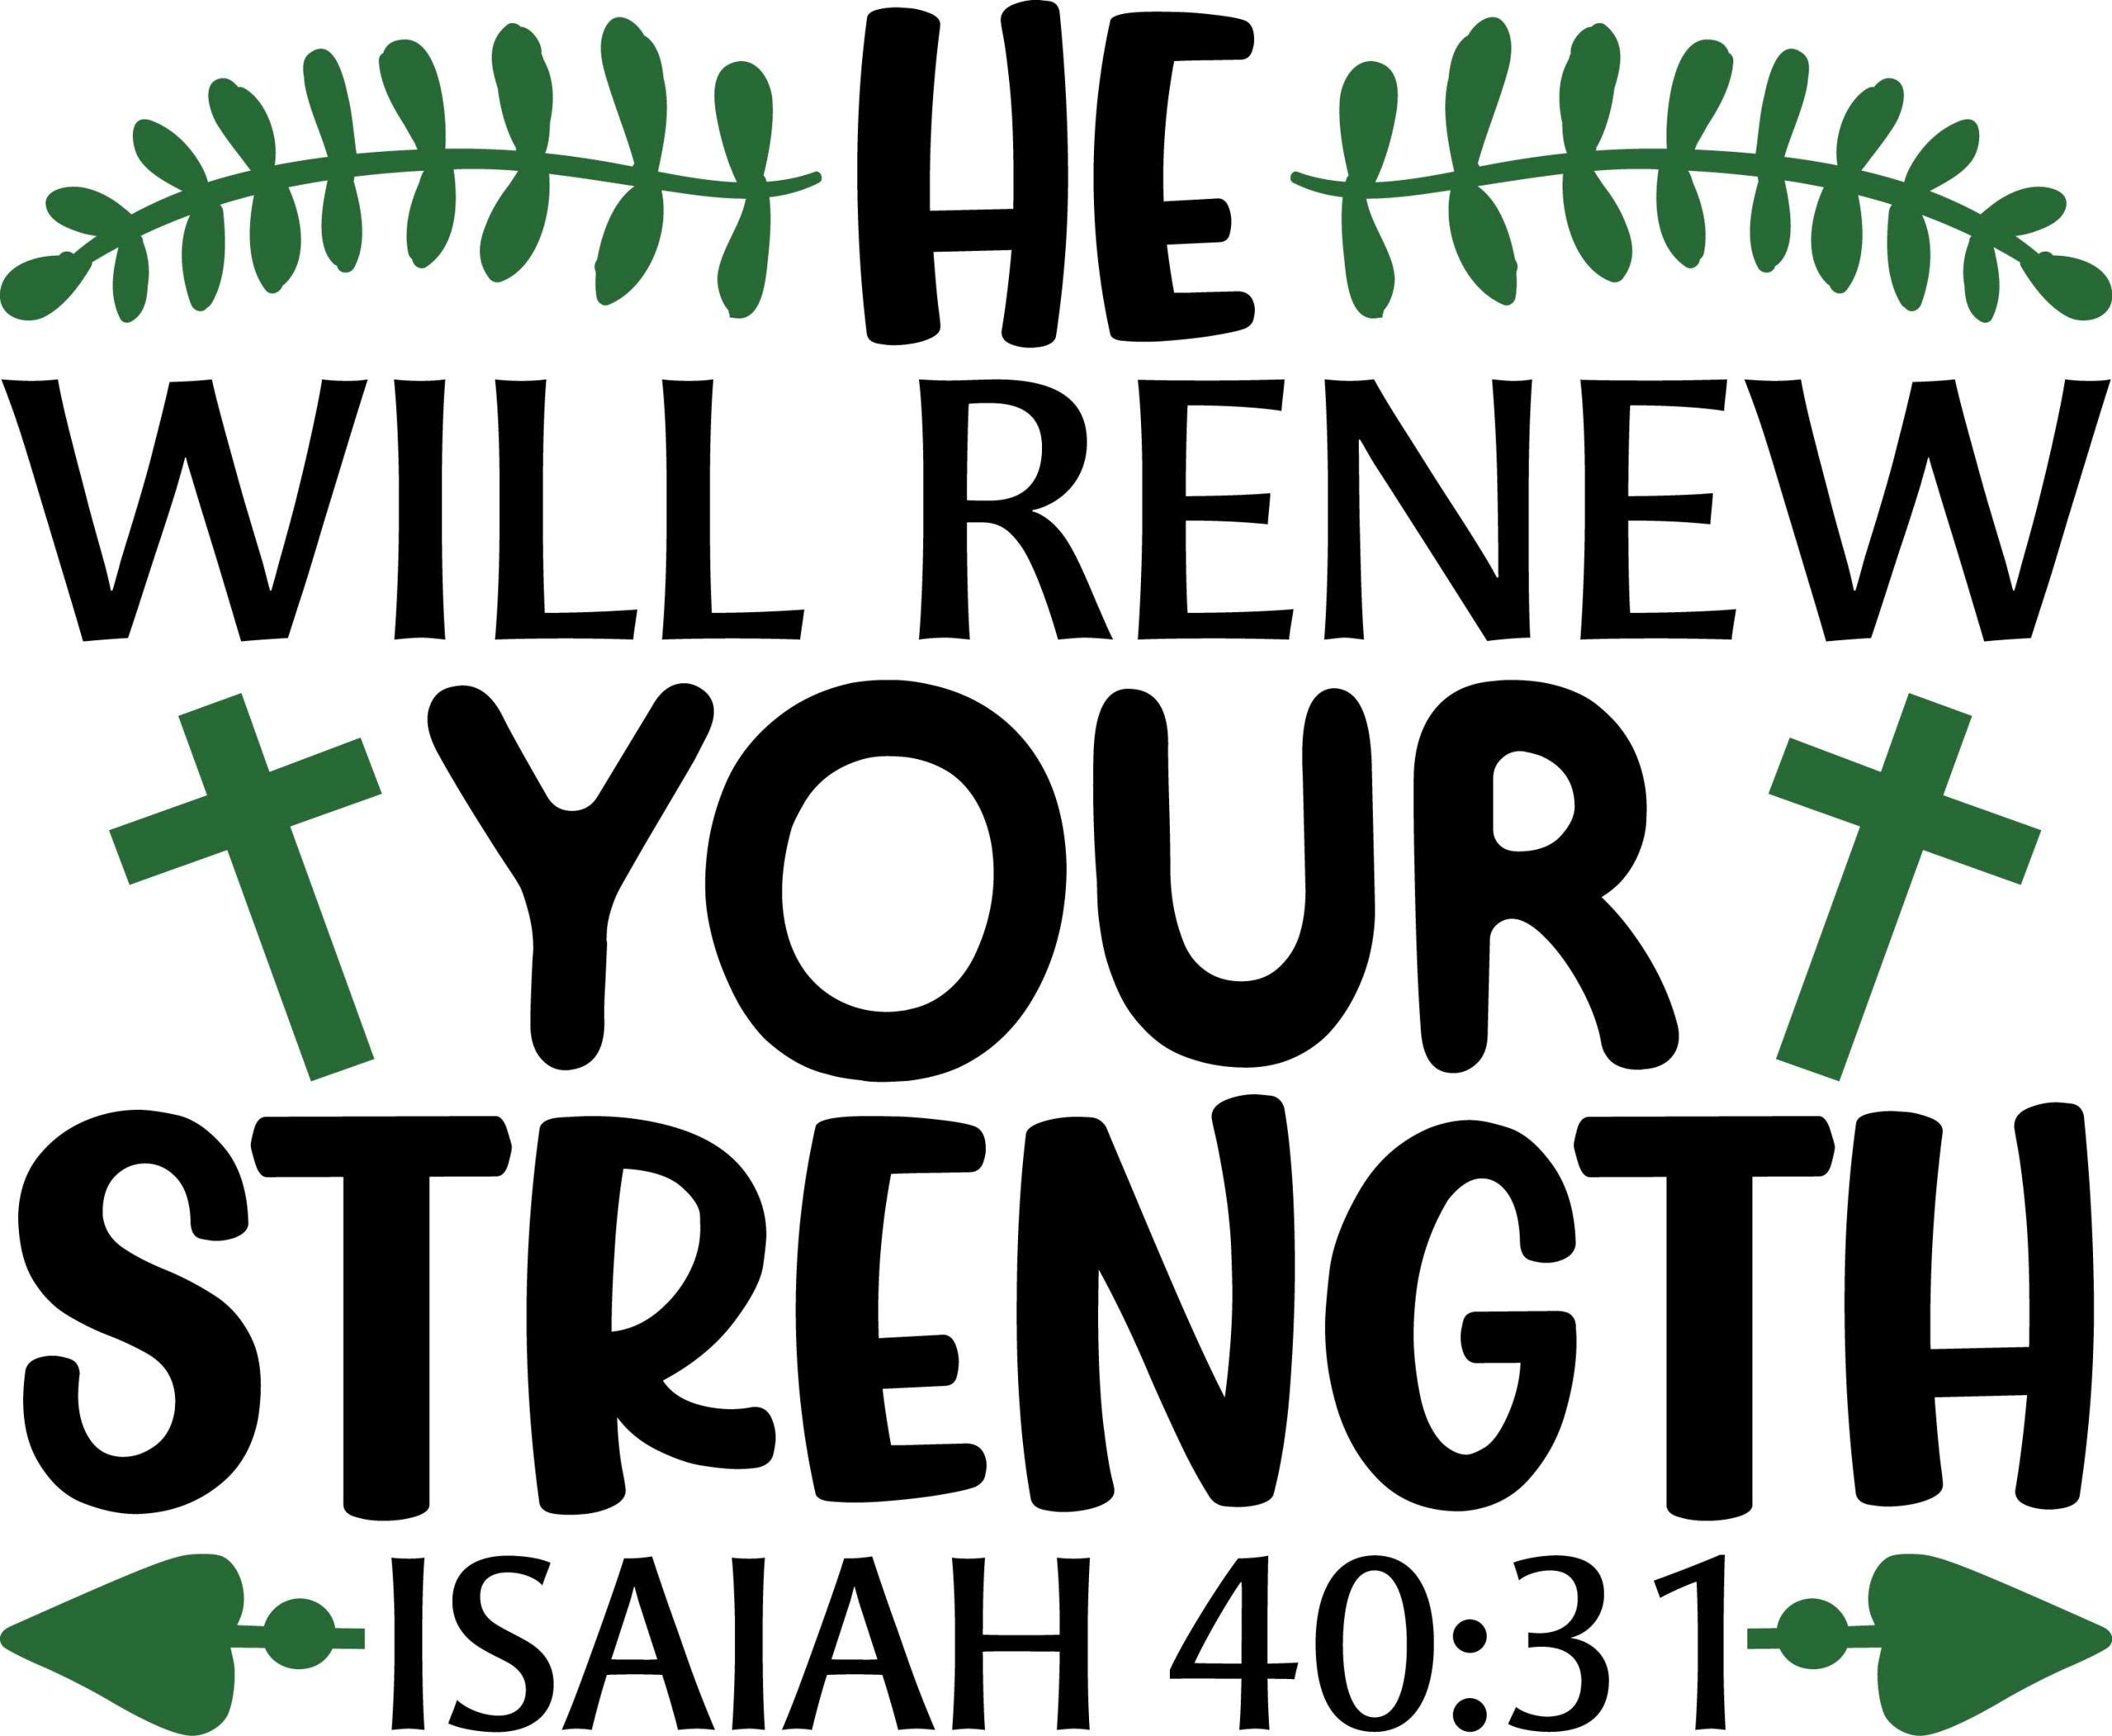 He will renew your strength Isaiah 40:31, bible verses, scripture verses, svg files, passages, sayings, cricut designs, silhouette, embroidery, bundle, free cut files, design space, vector